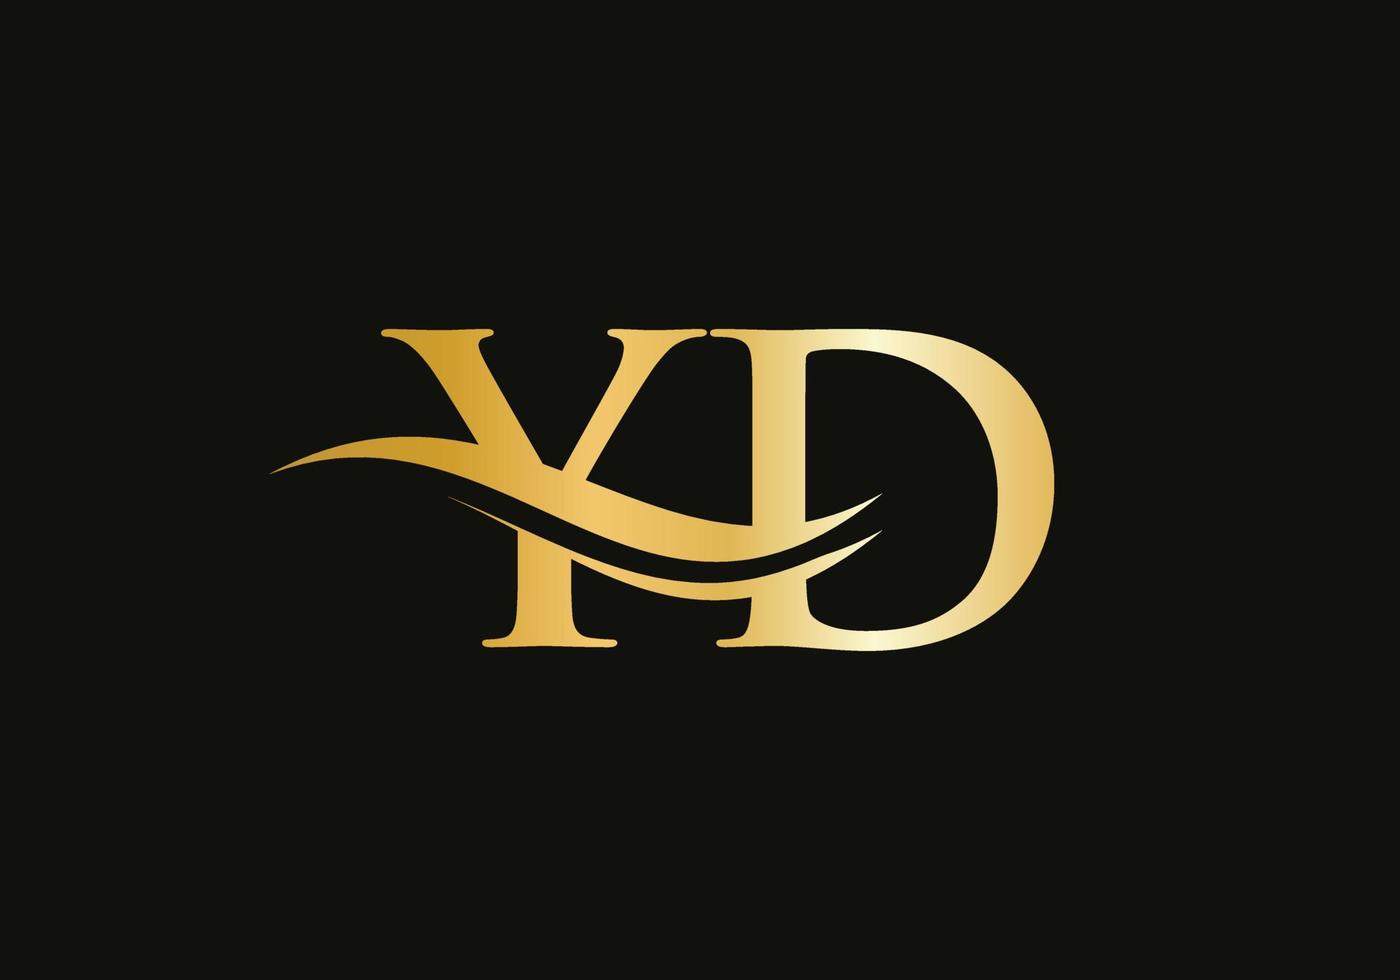 Gold YD letter logo design. YD logo design with creative and modern trendy vector